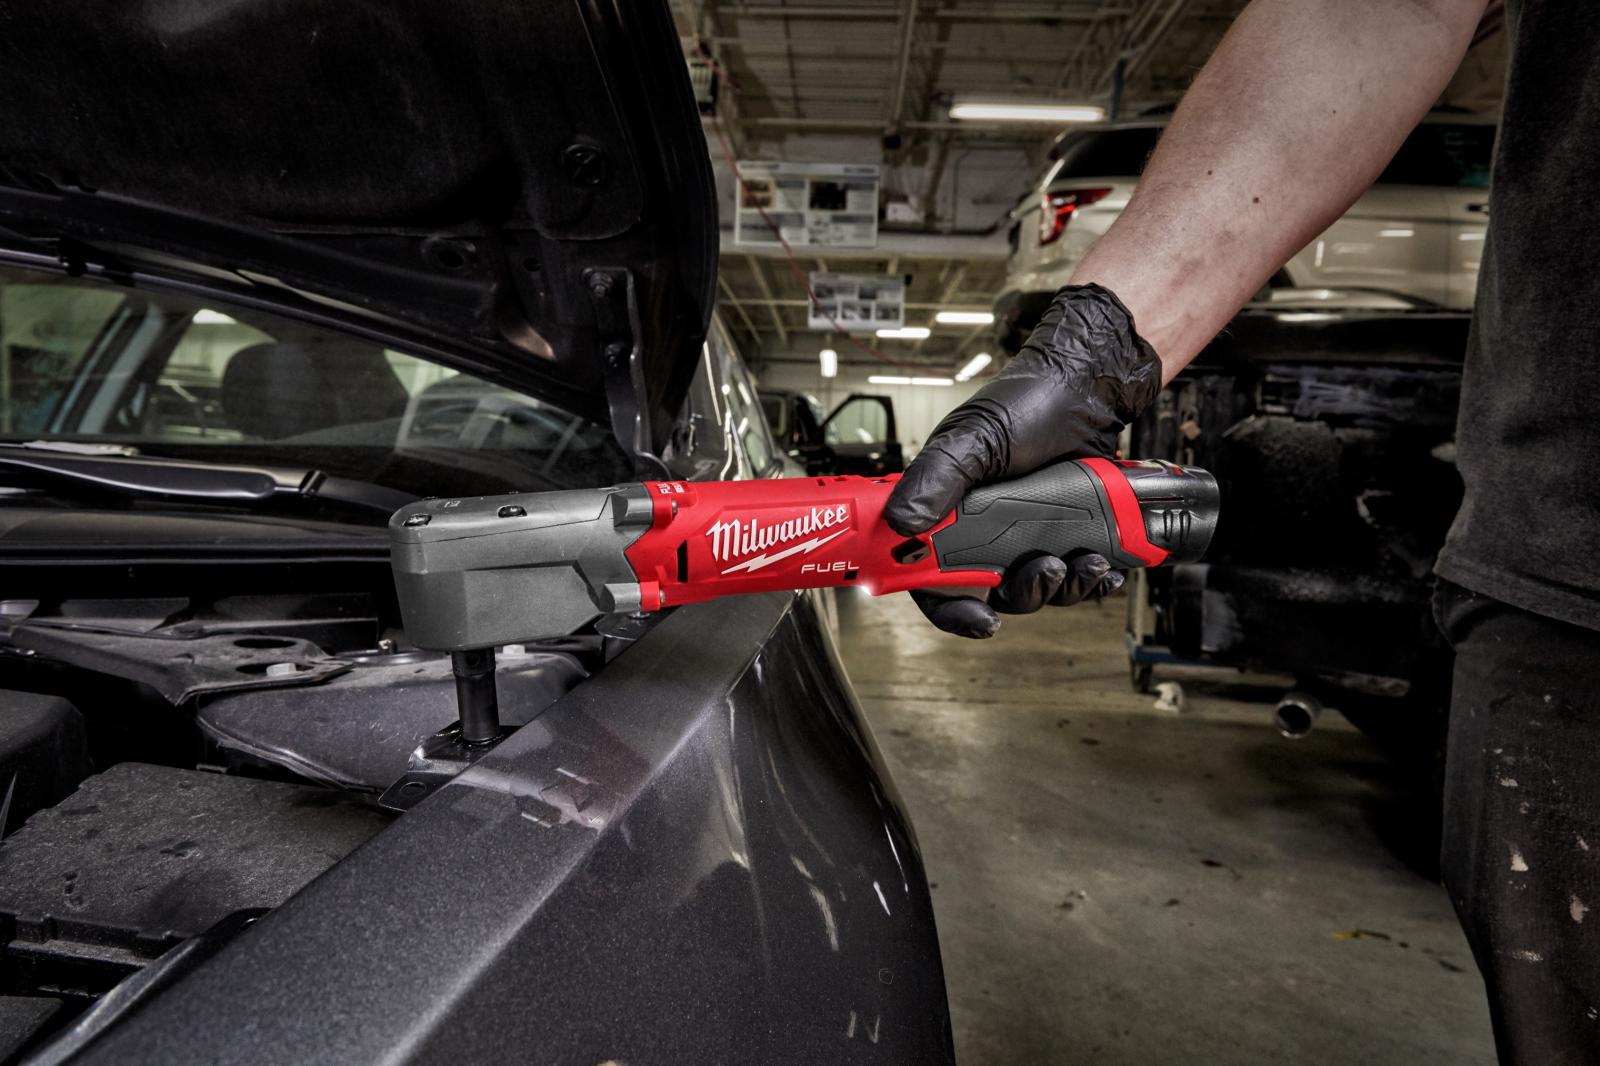 Milwaukee M12 Fuel 3/8" Right Angle Impact Wrench w/ Friction Ring ToolMilwaukee M12 Fuel 3/8" Right Angle Impact Wrench w/ Friction Ring Tool